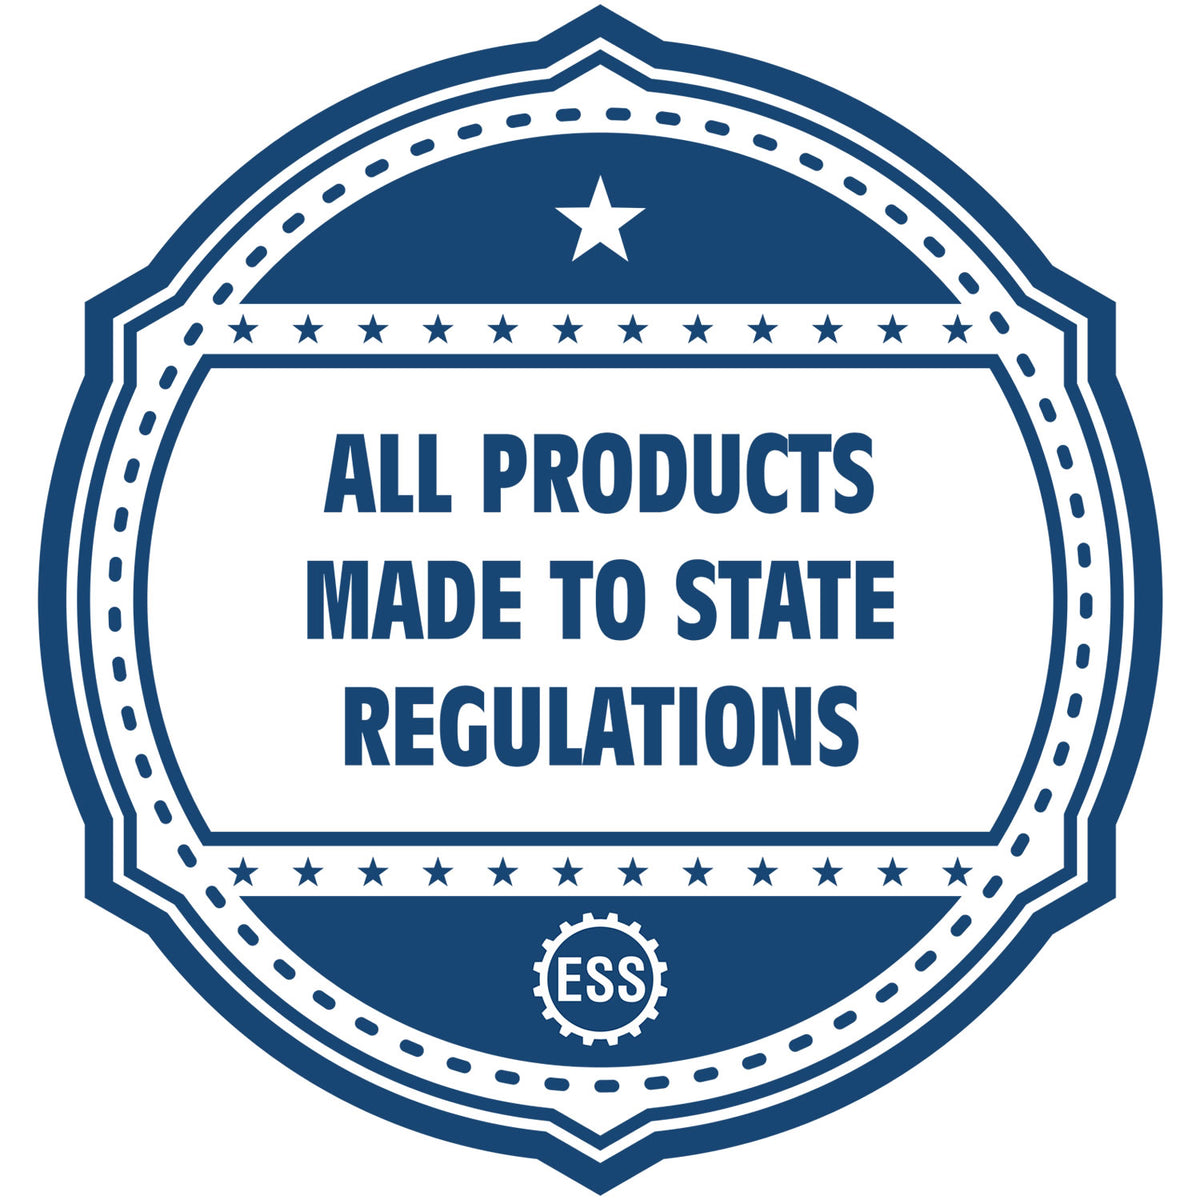 A blue icon or badge for the Self-Inking Massachusetts Geologist Stamp showing that this product is made in compliance with state regulations.